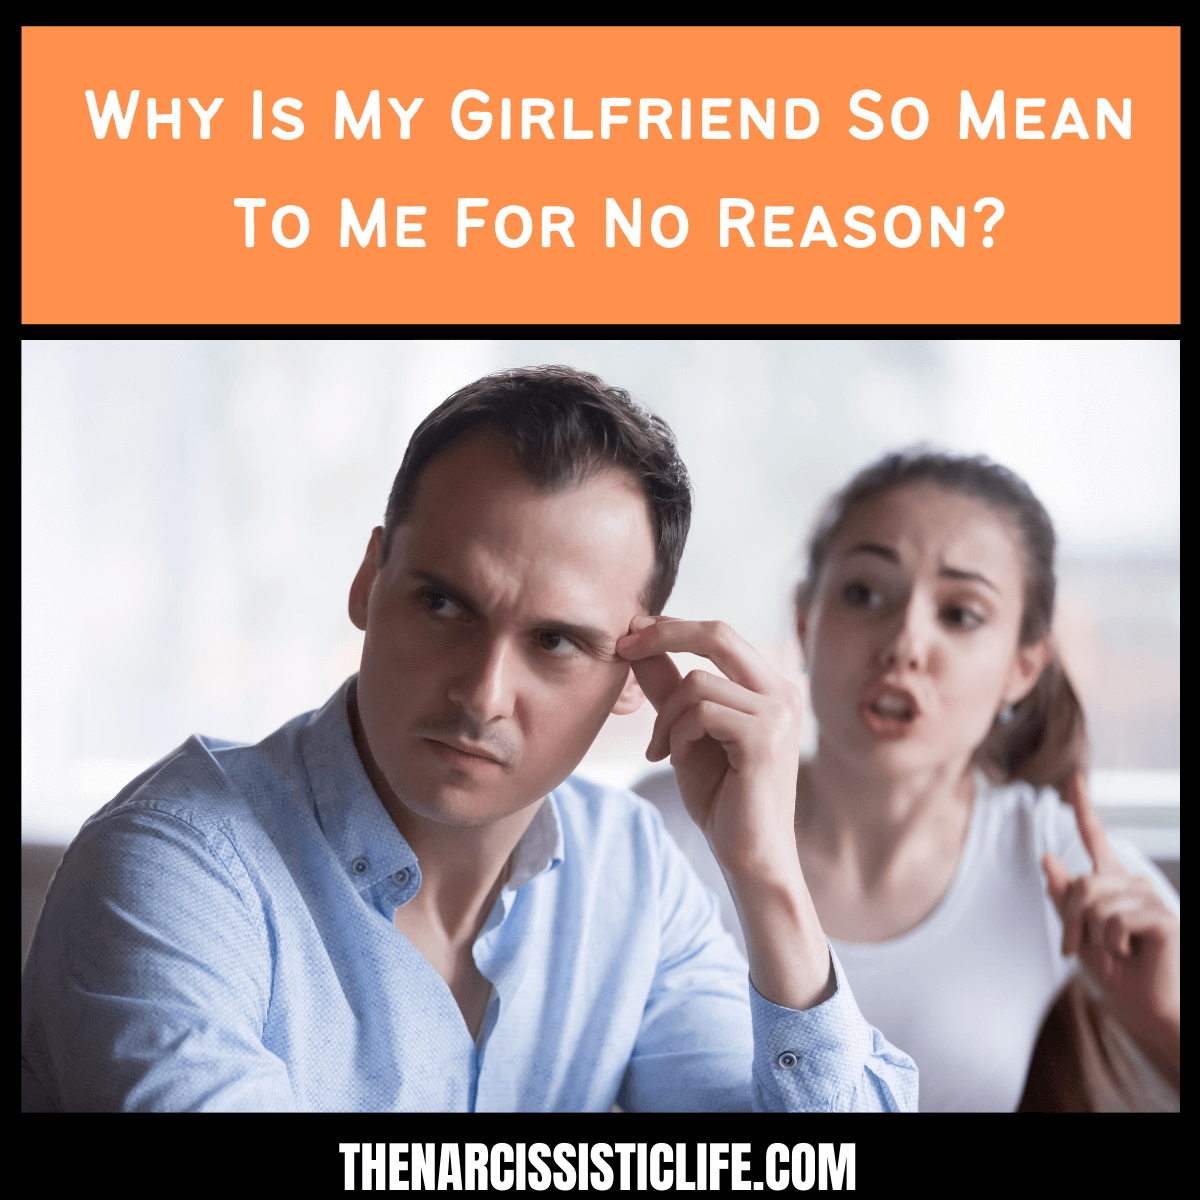 Why Is My Girlfriend So Mean To Me For No Reason? - The Narcissistic Life